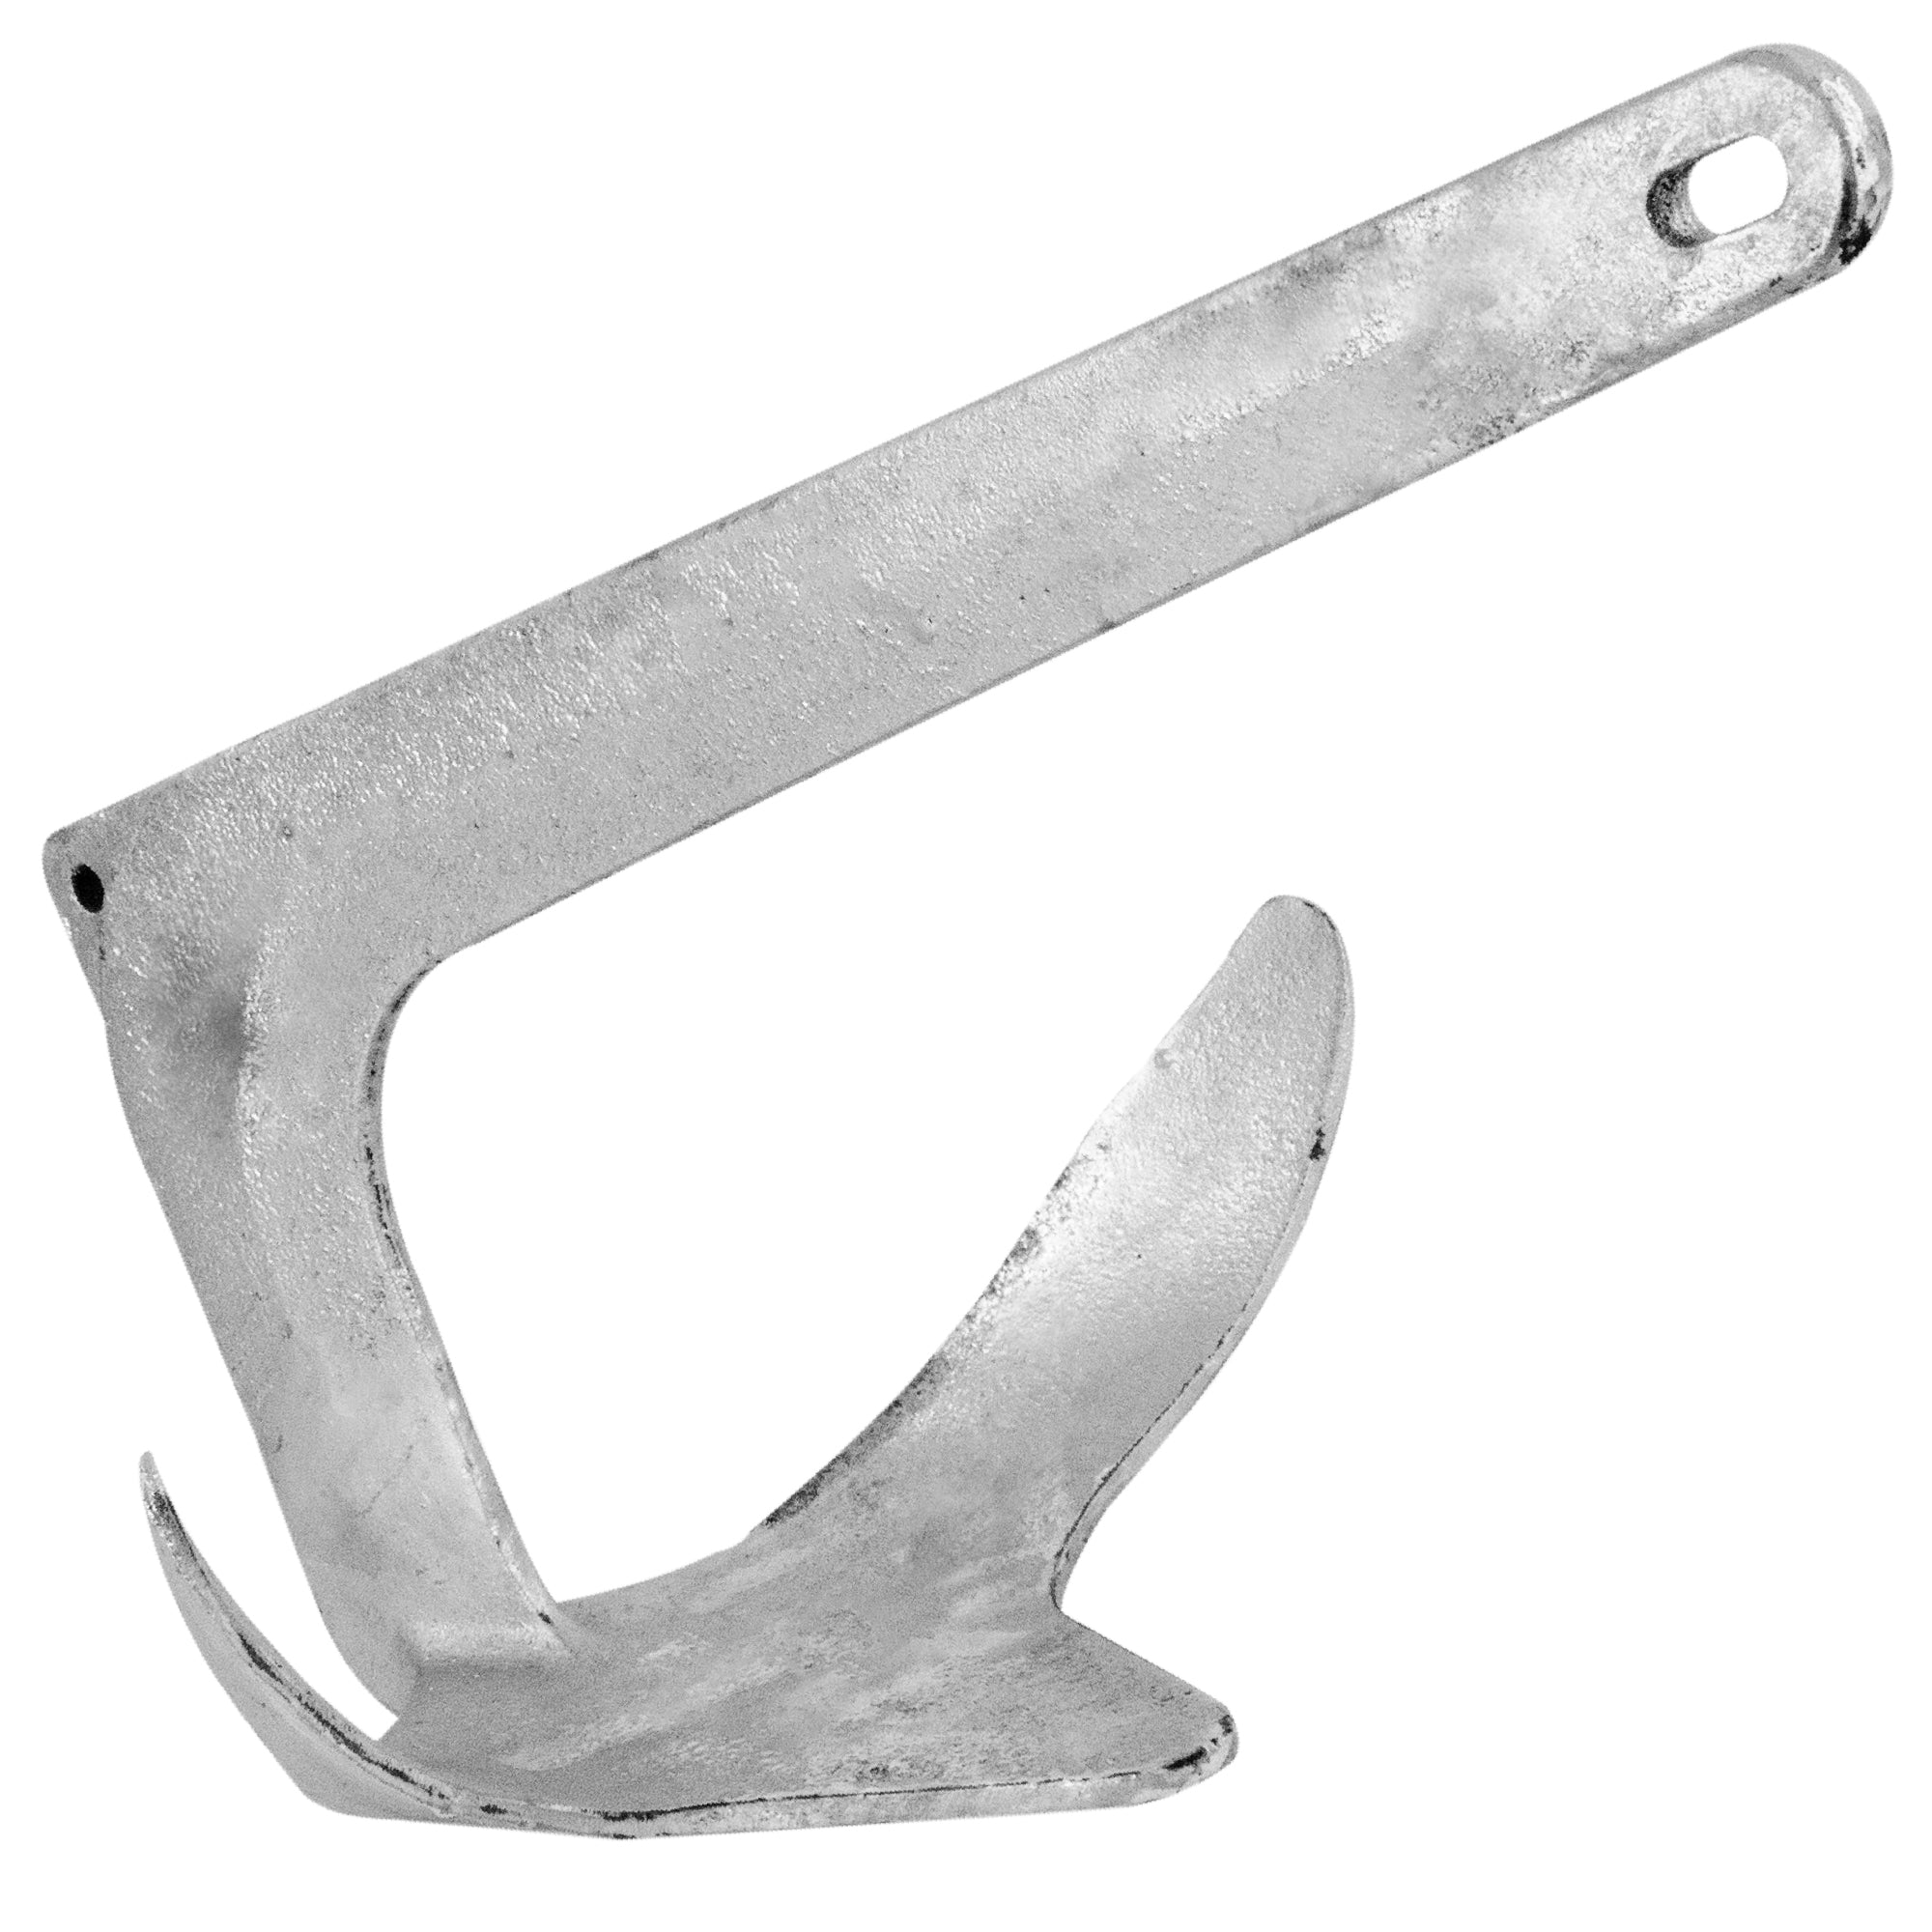 Bruce Style Claw Anchor, 2.2 Lb / 1 Kg Hot Dipped Galvanized - FO4552